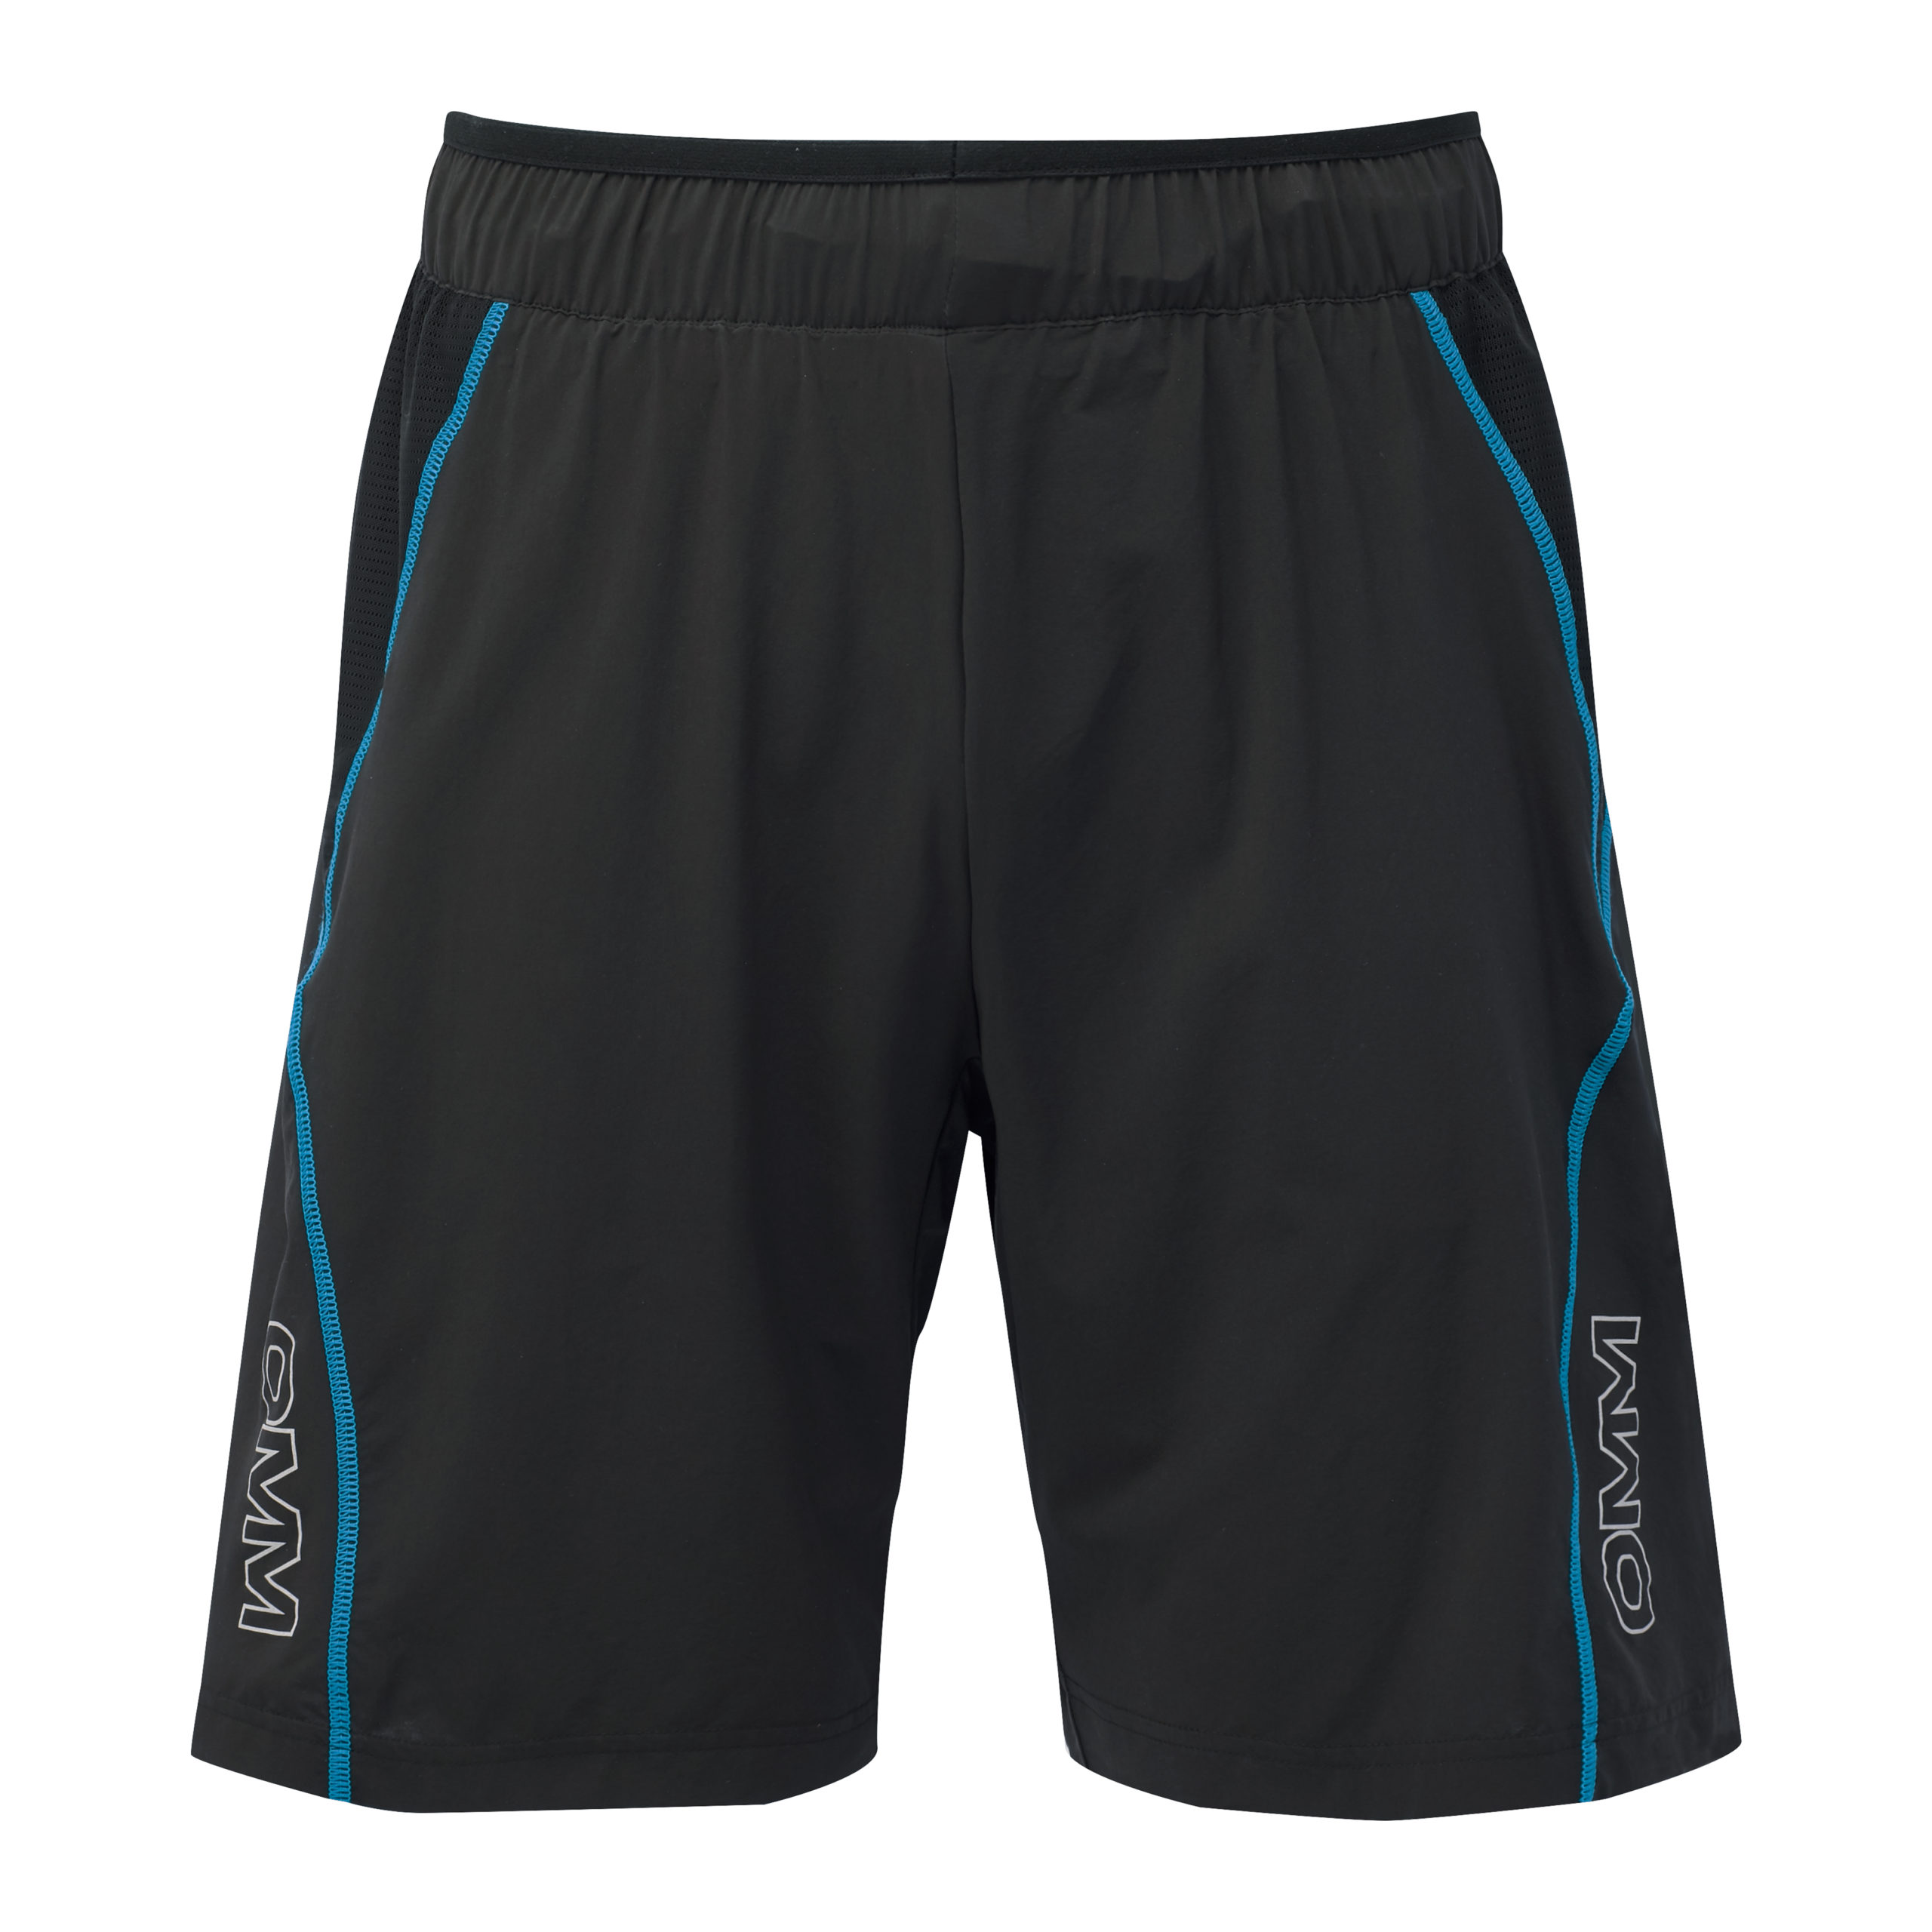 ss19 oc120 mens pace shorts black blue front scaled 1